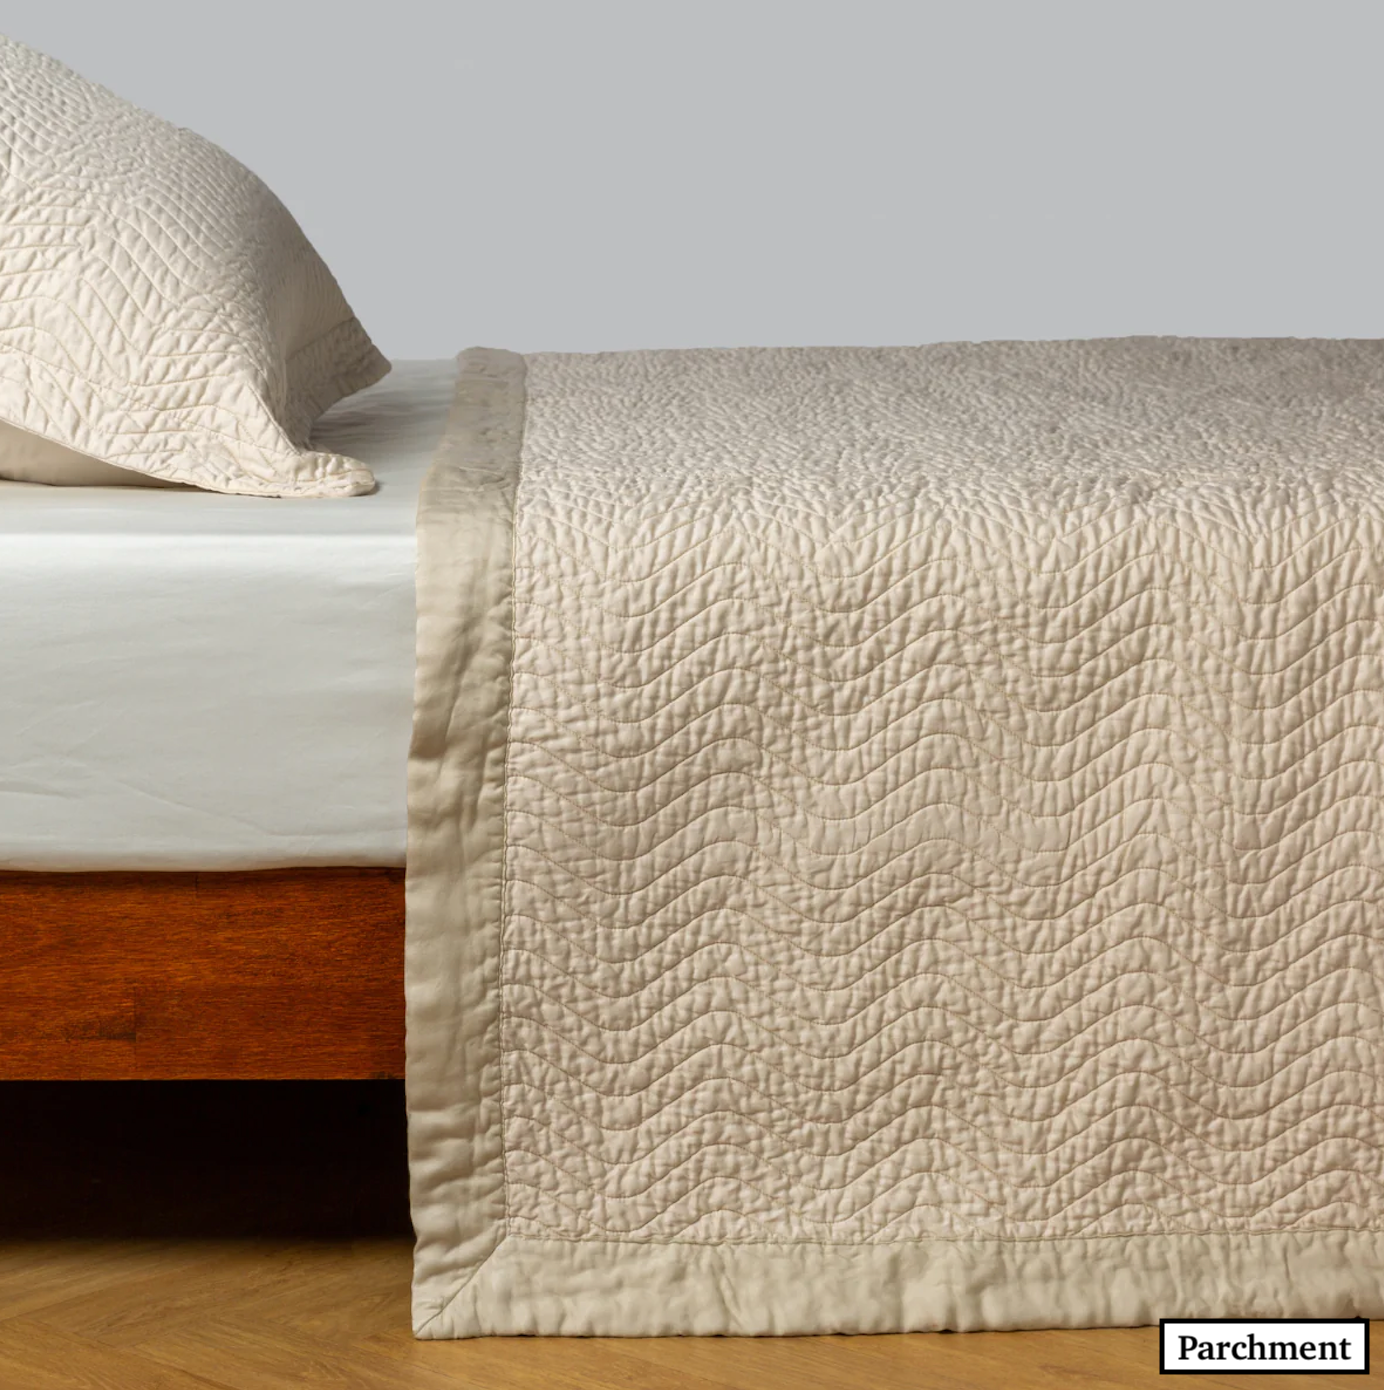 NEW Cirillo coverlets and shams by Bella Notte (**to order)